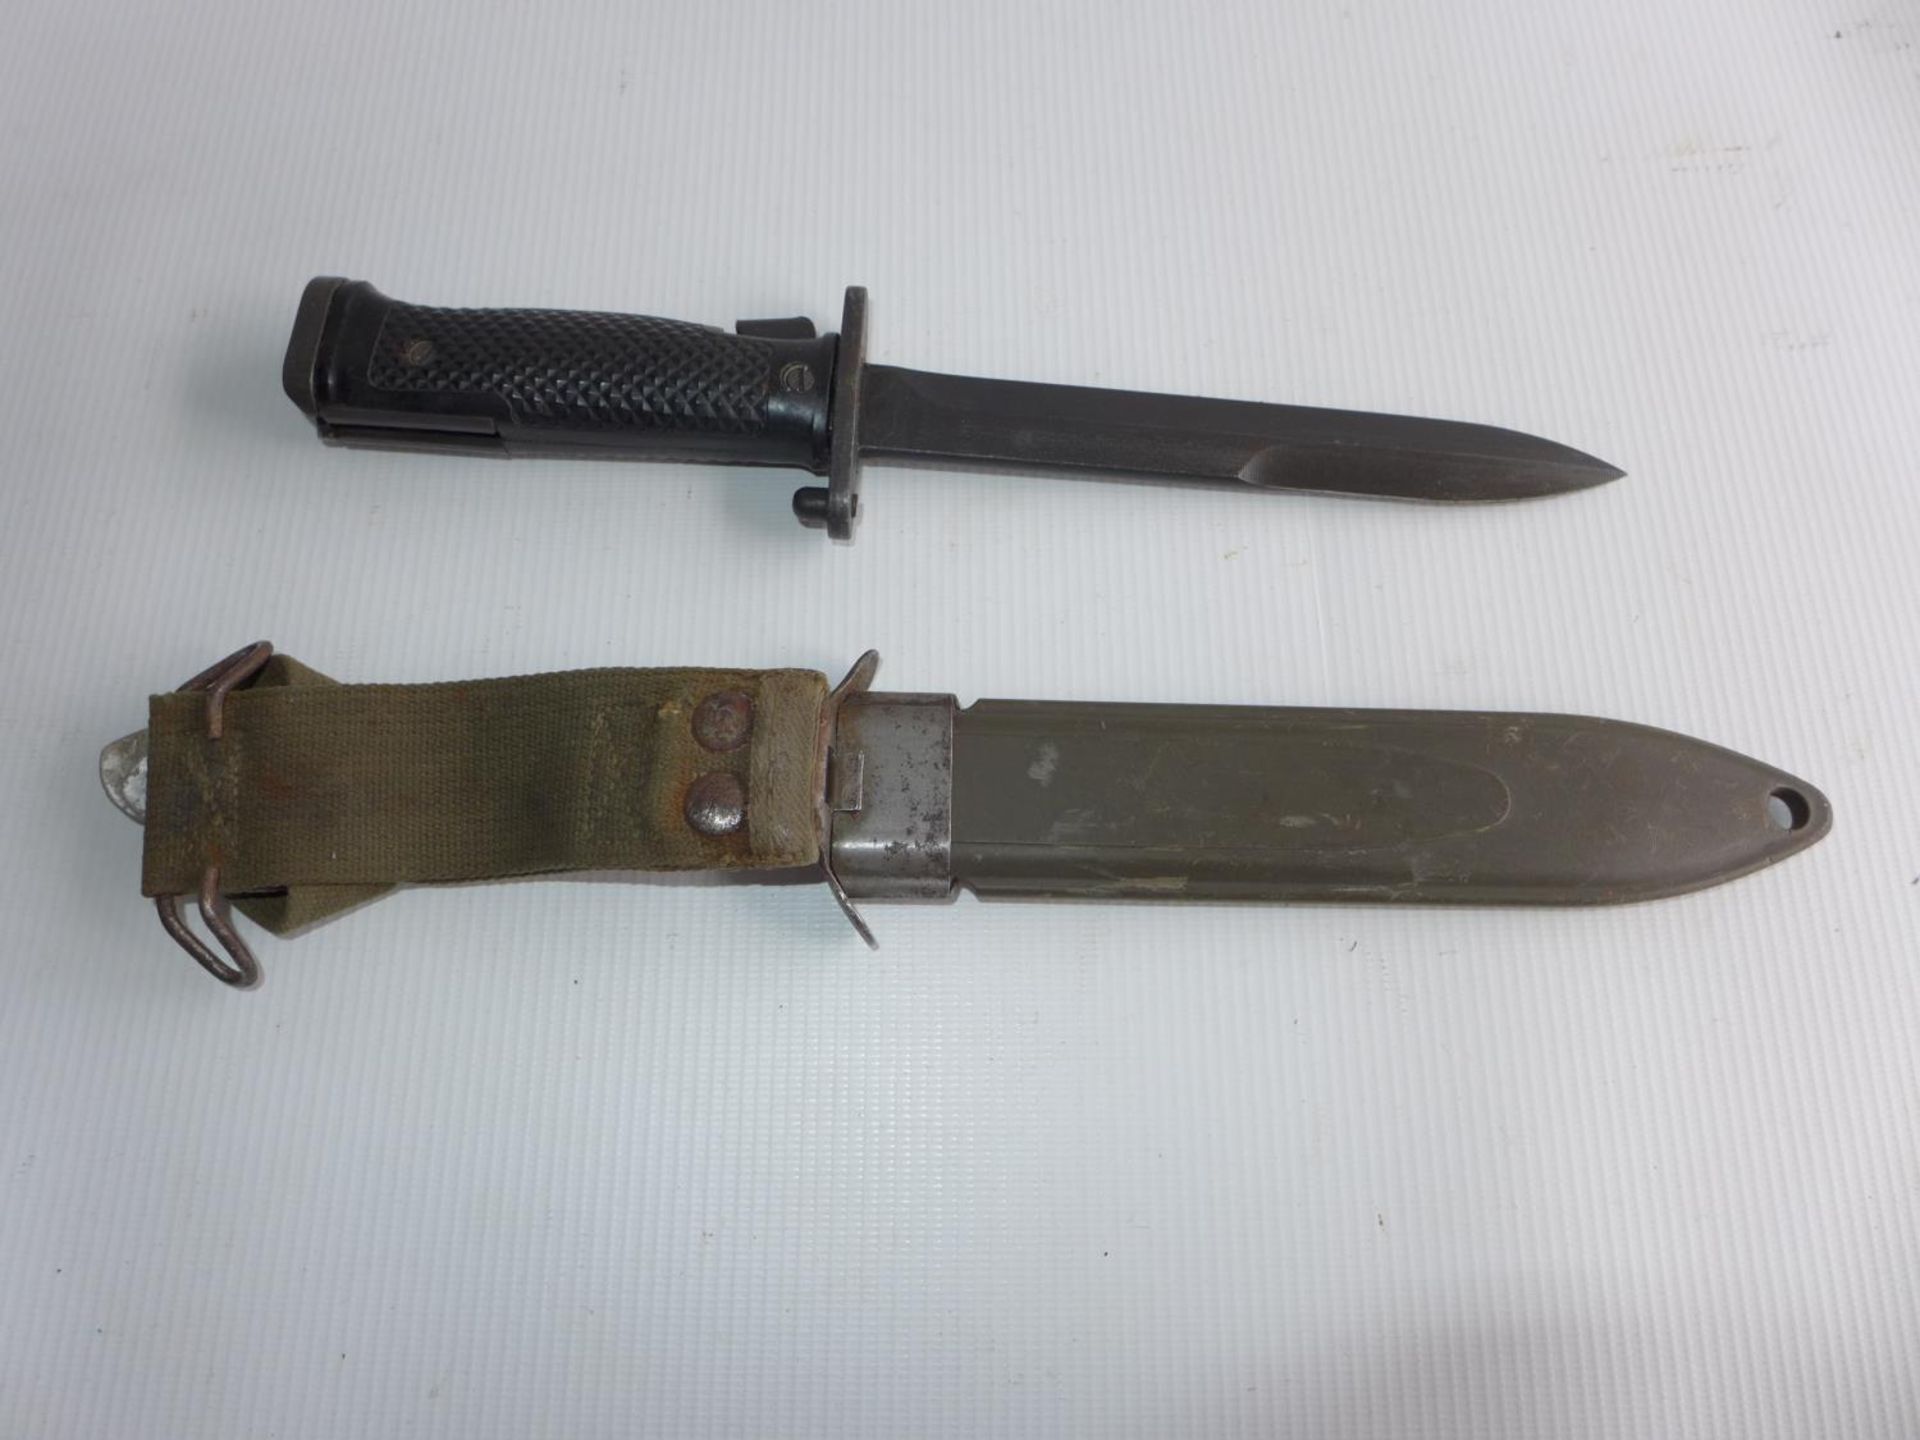 A USA M8 A1 BAYONET AND SCABBARD 16.5cm BLADE - Image 2 of 4